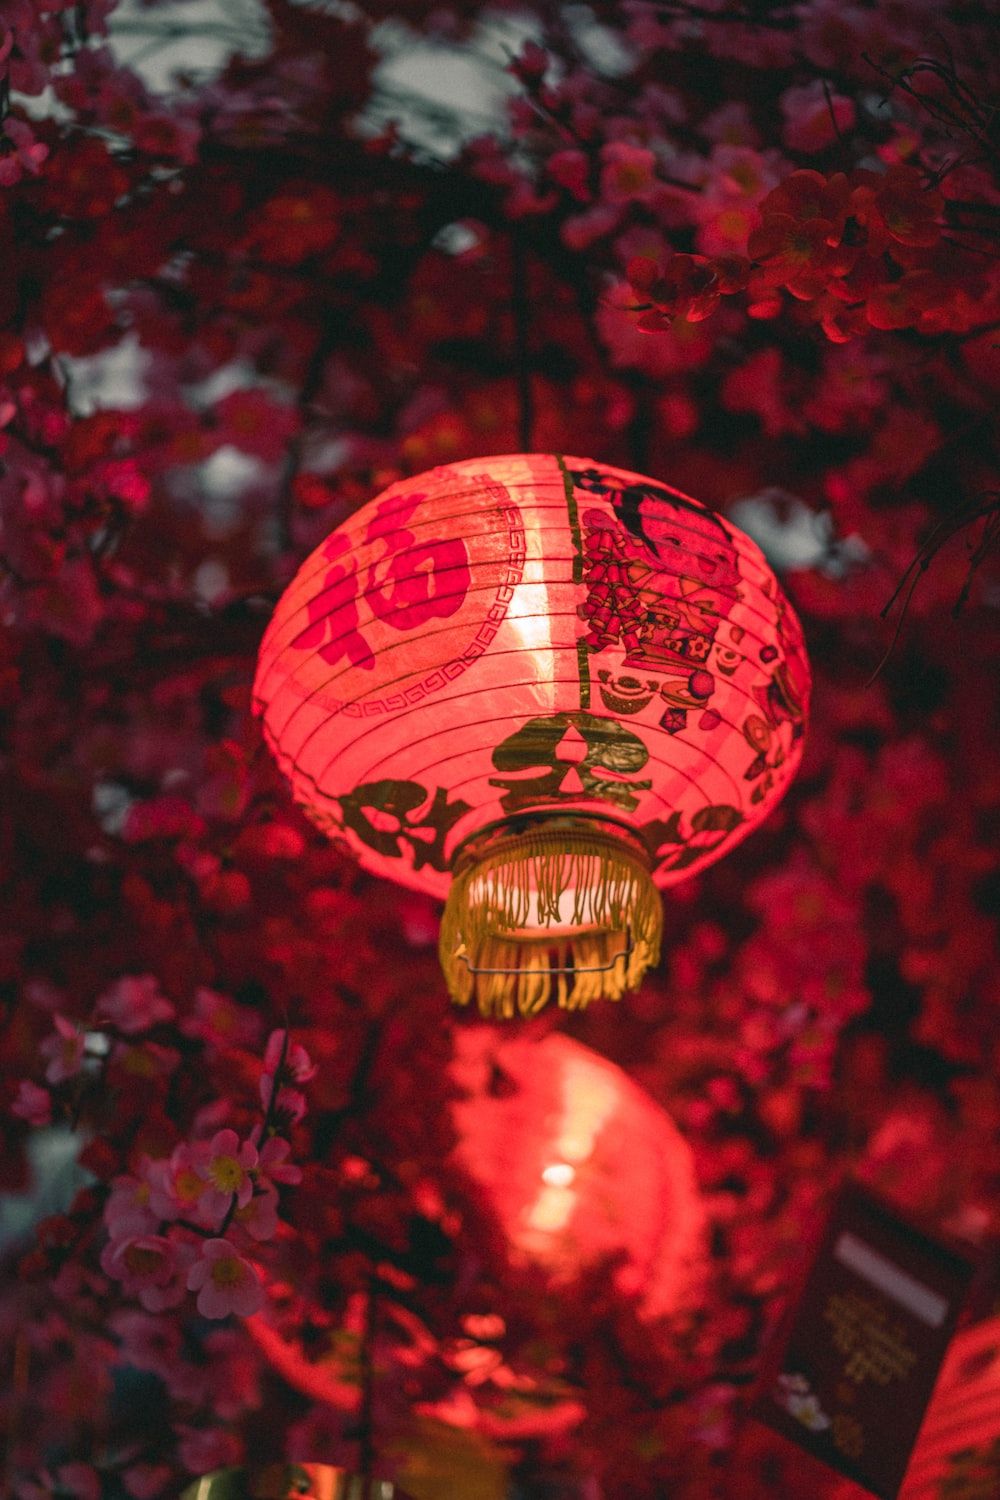 A red lantern hanging from the tree - New Year